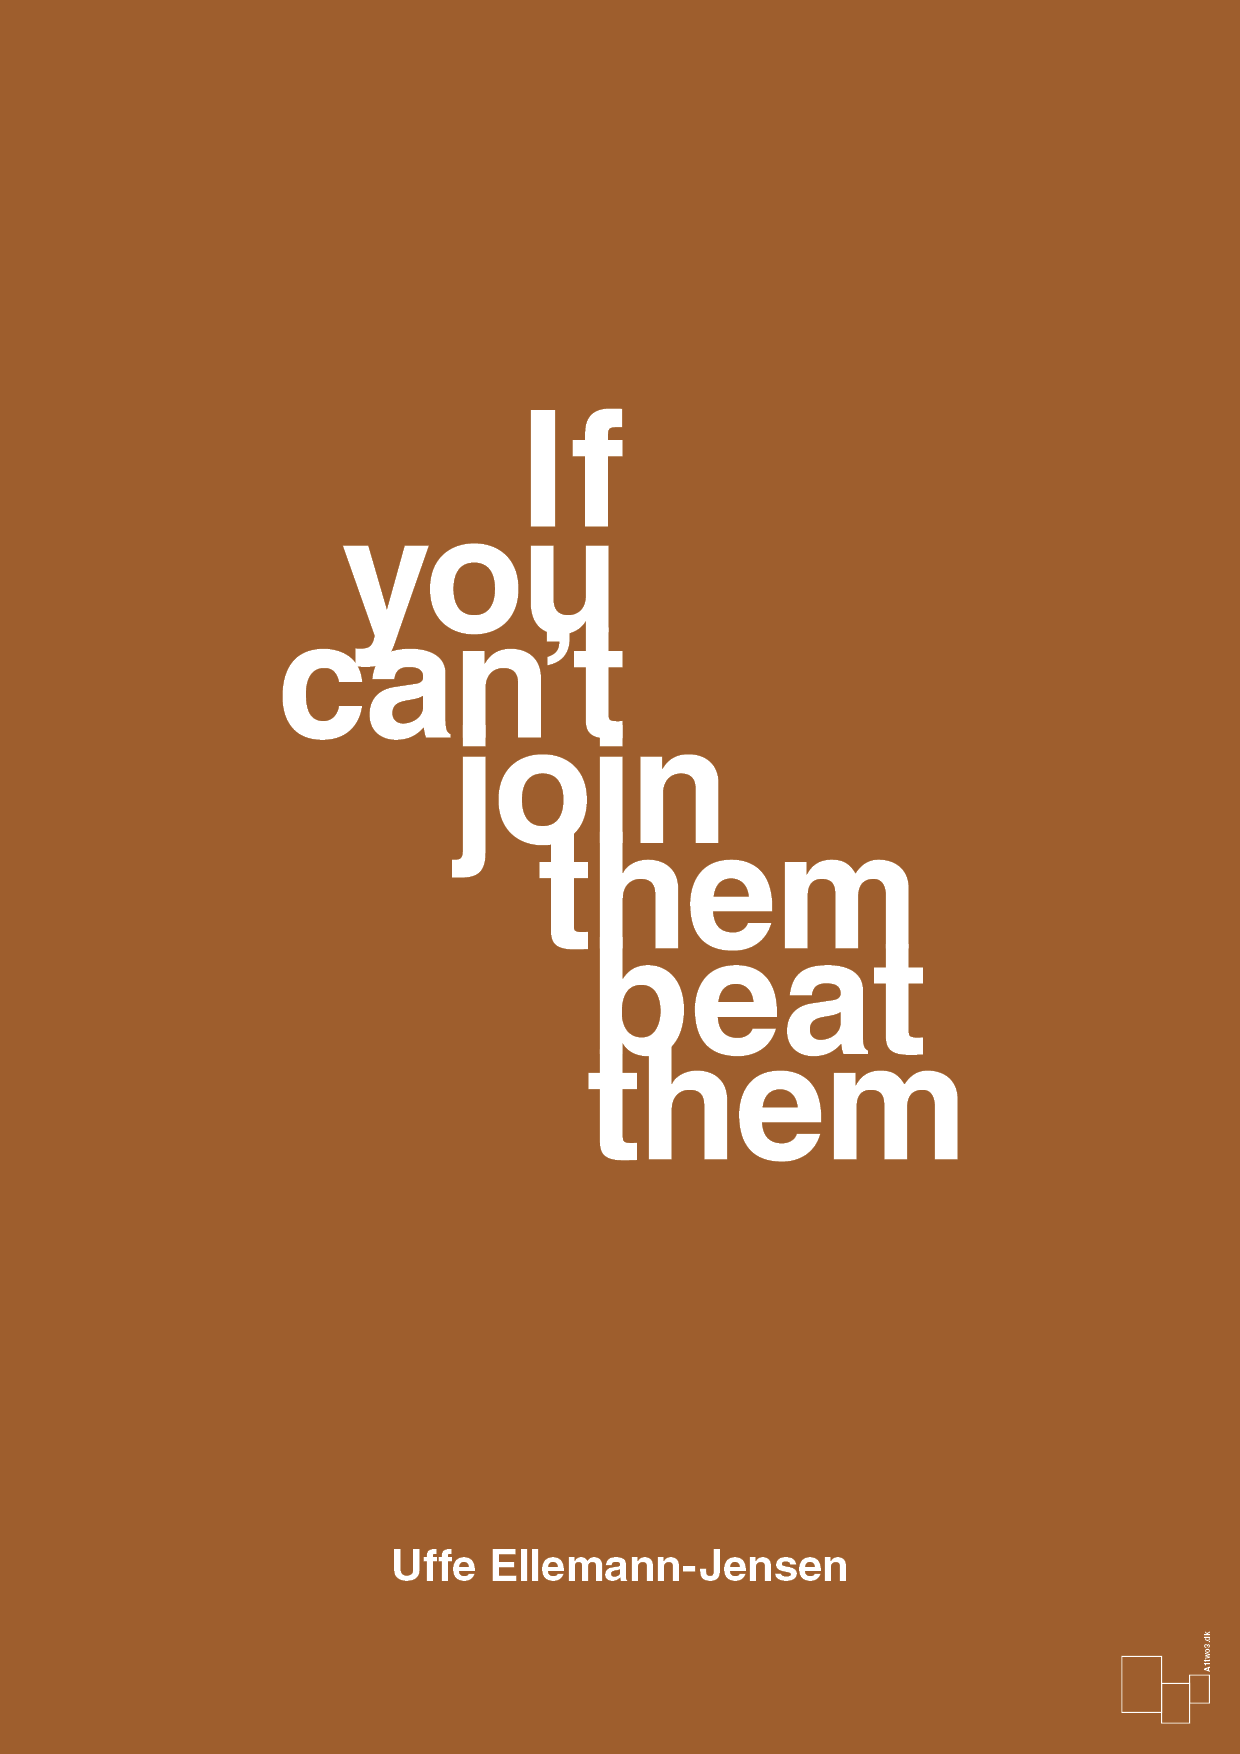 if you cant join them beat them - Plakat med Citater i Cognac